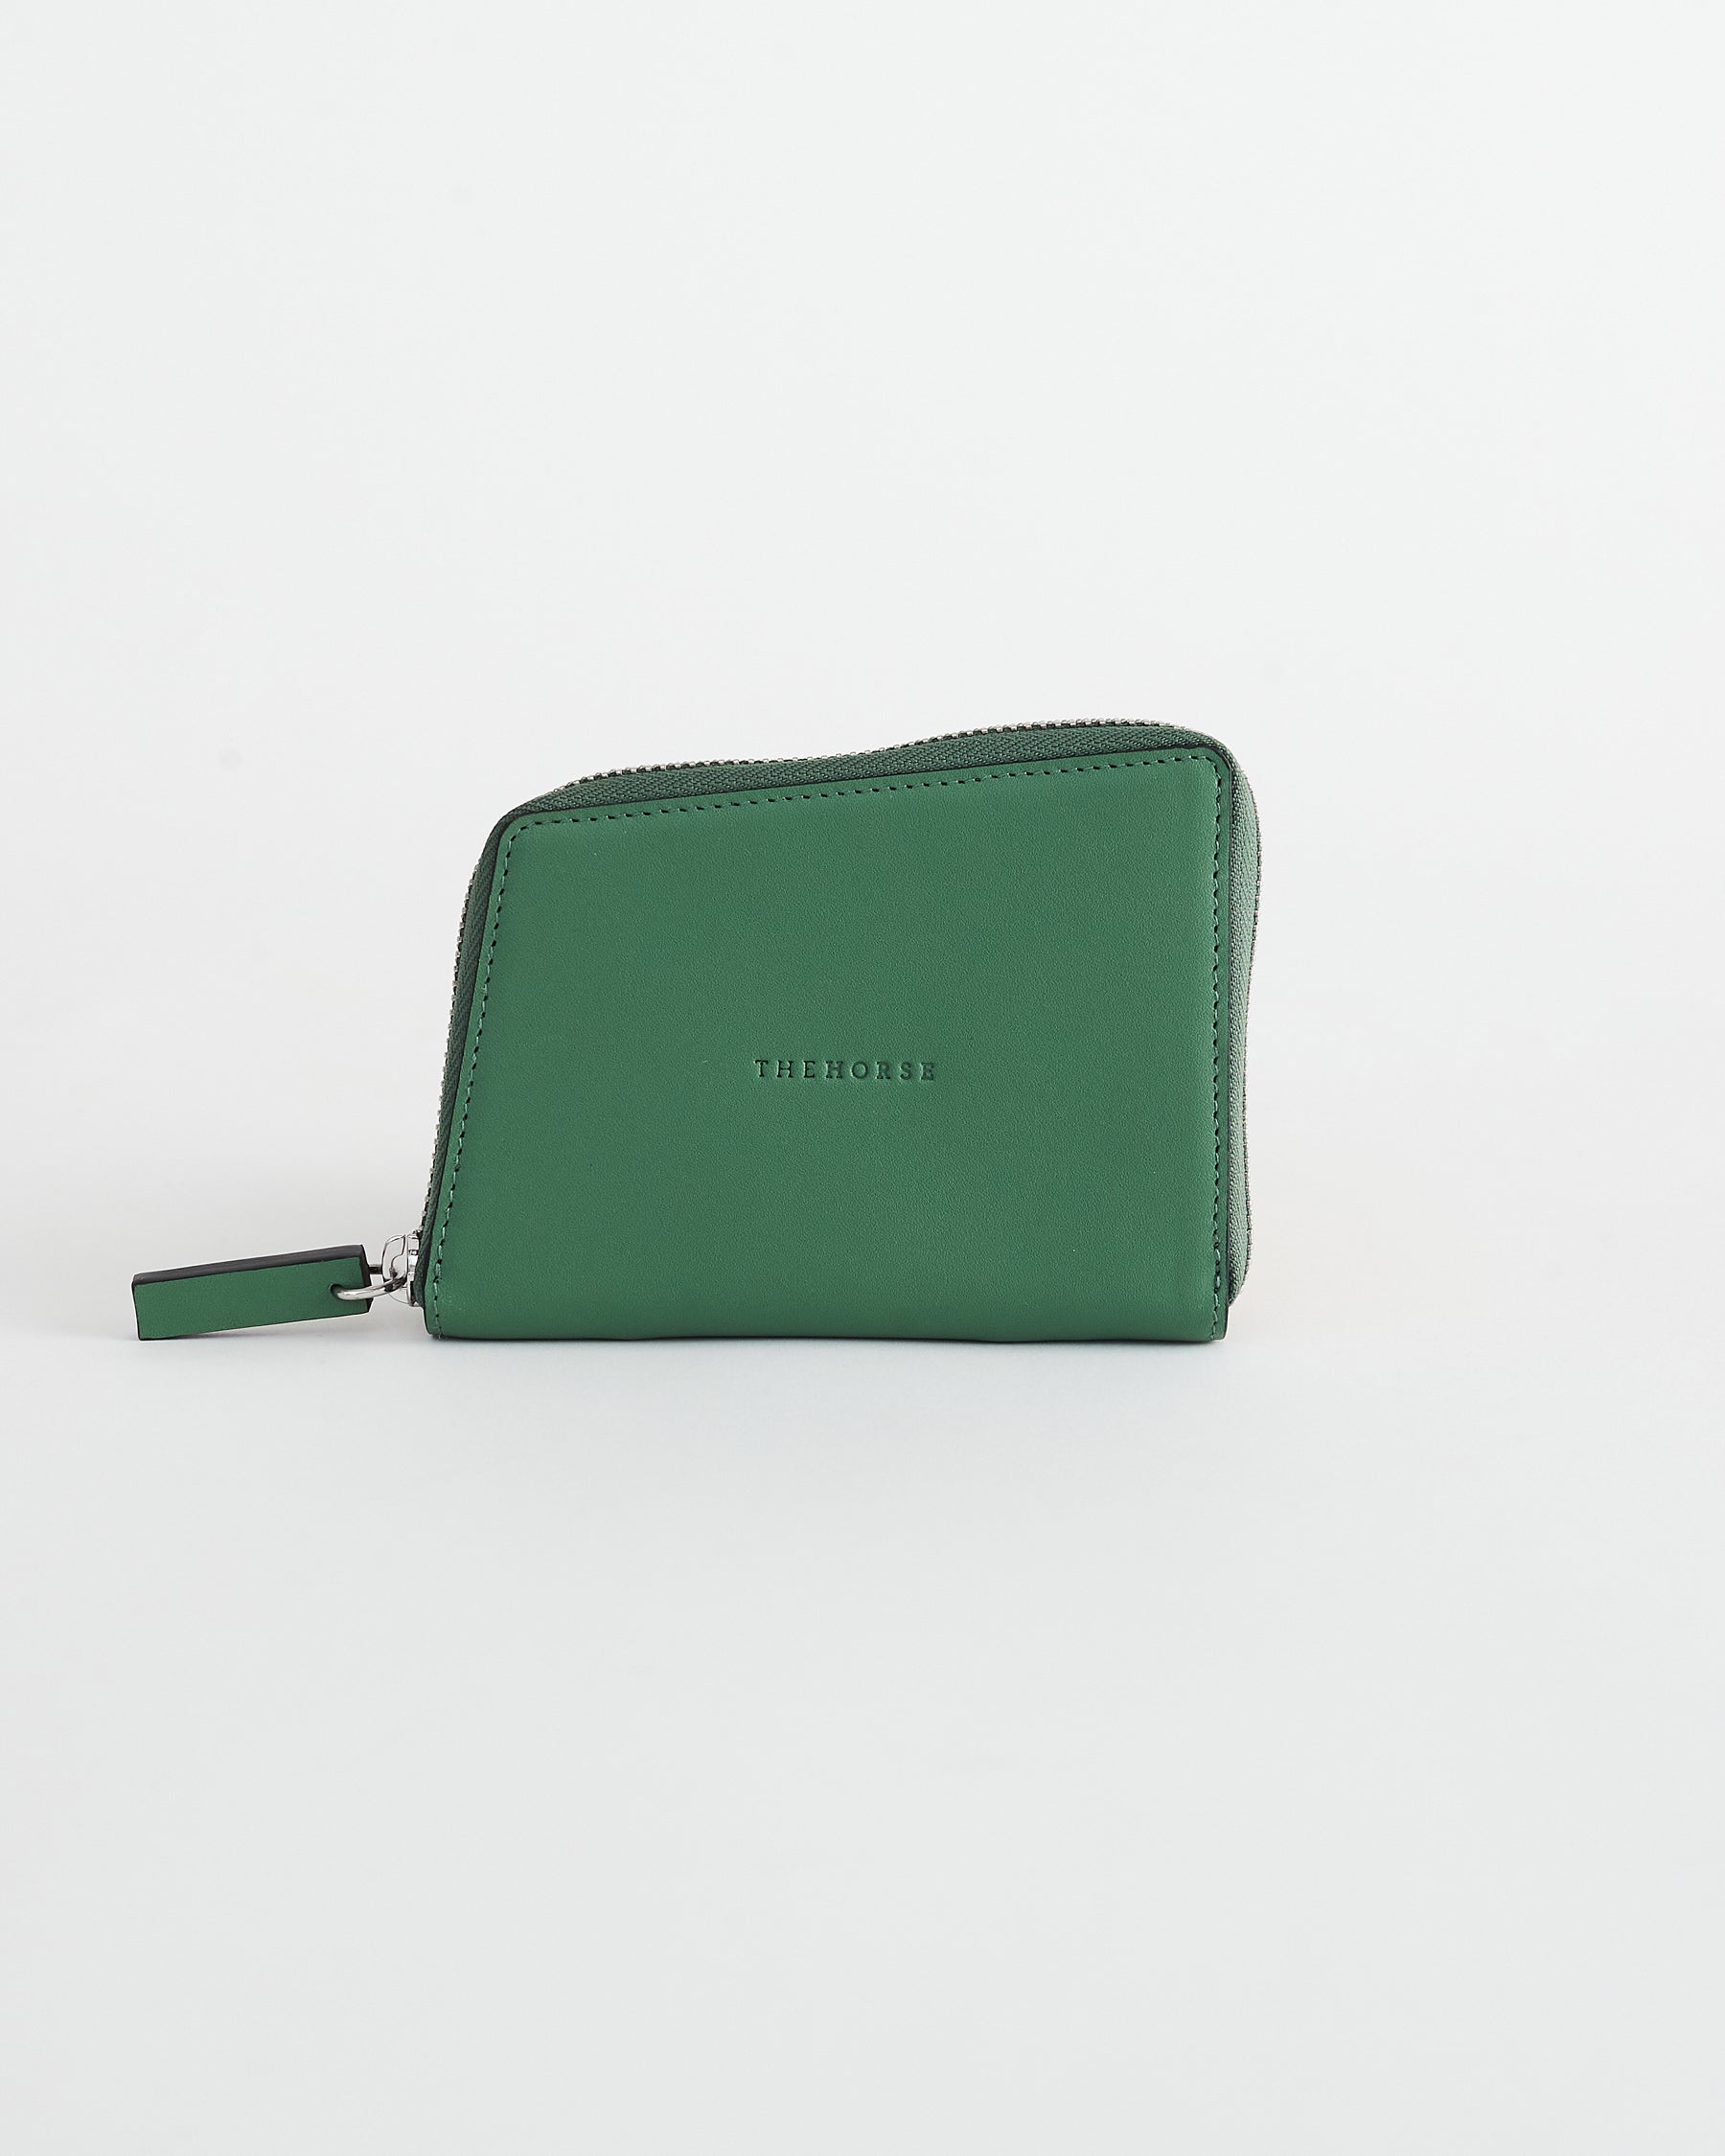 The Bo Women's Compact Leather Zip Wallet in Forest Green by The Horse®